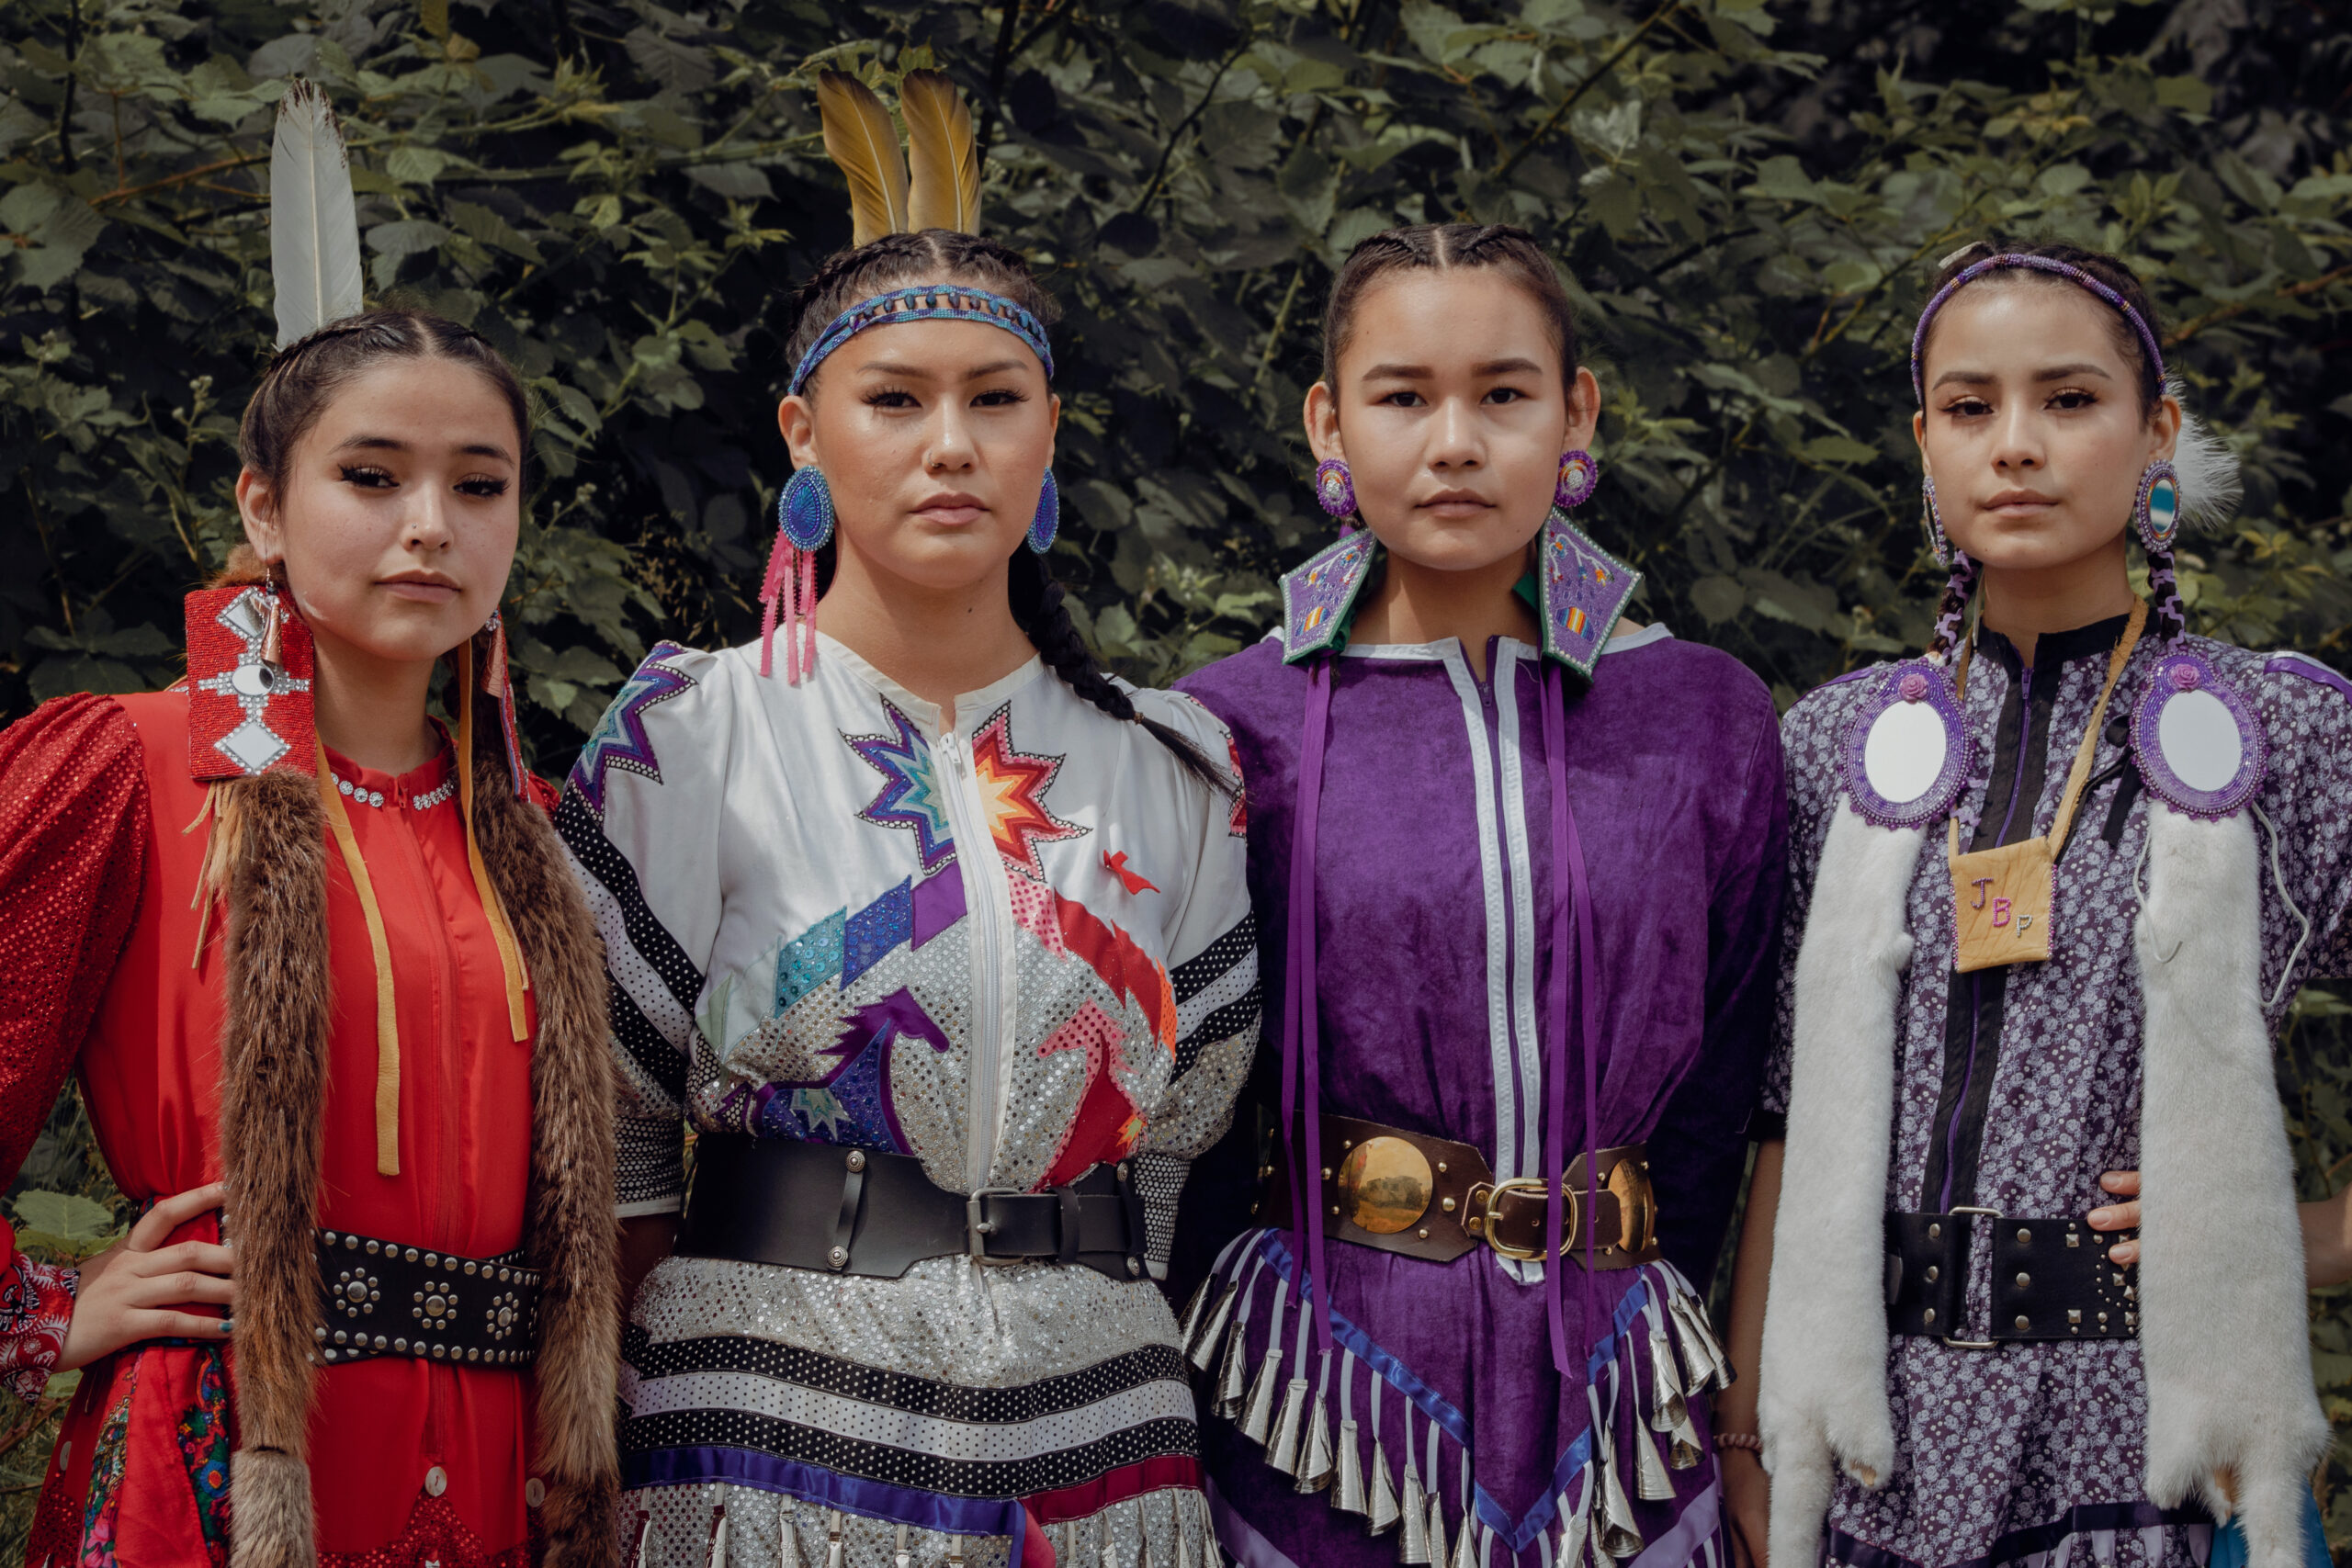 Four women wearing traditional Indigenous regalia stand together facing the camera.